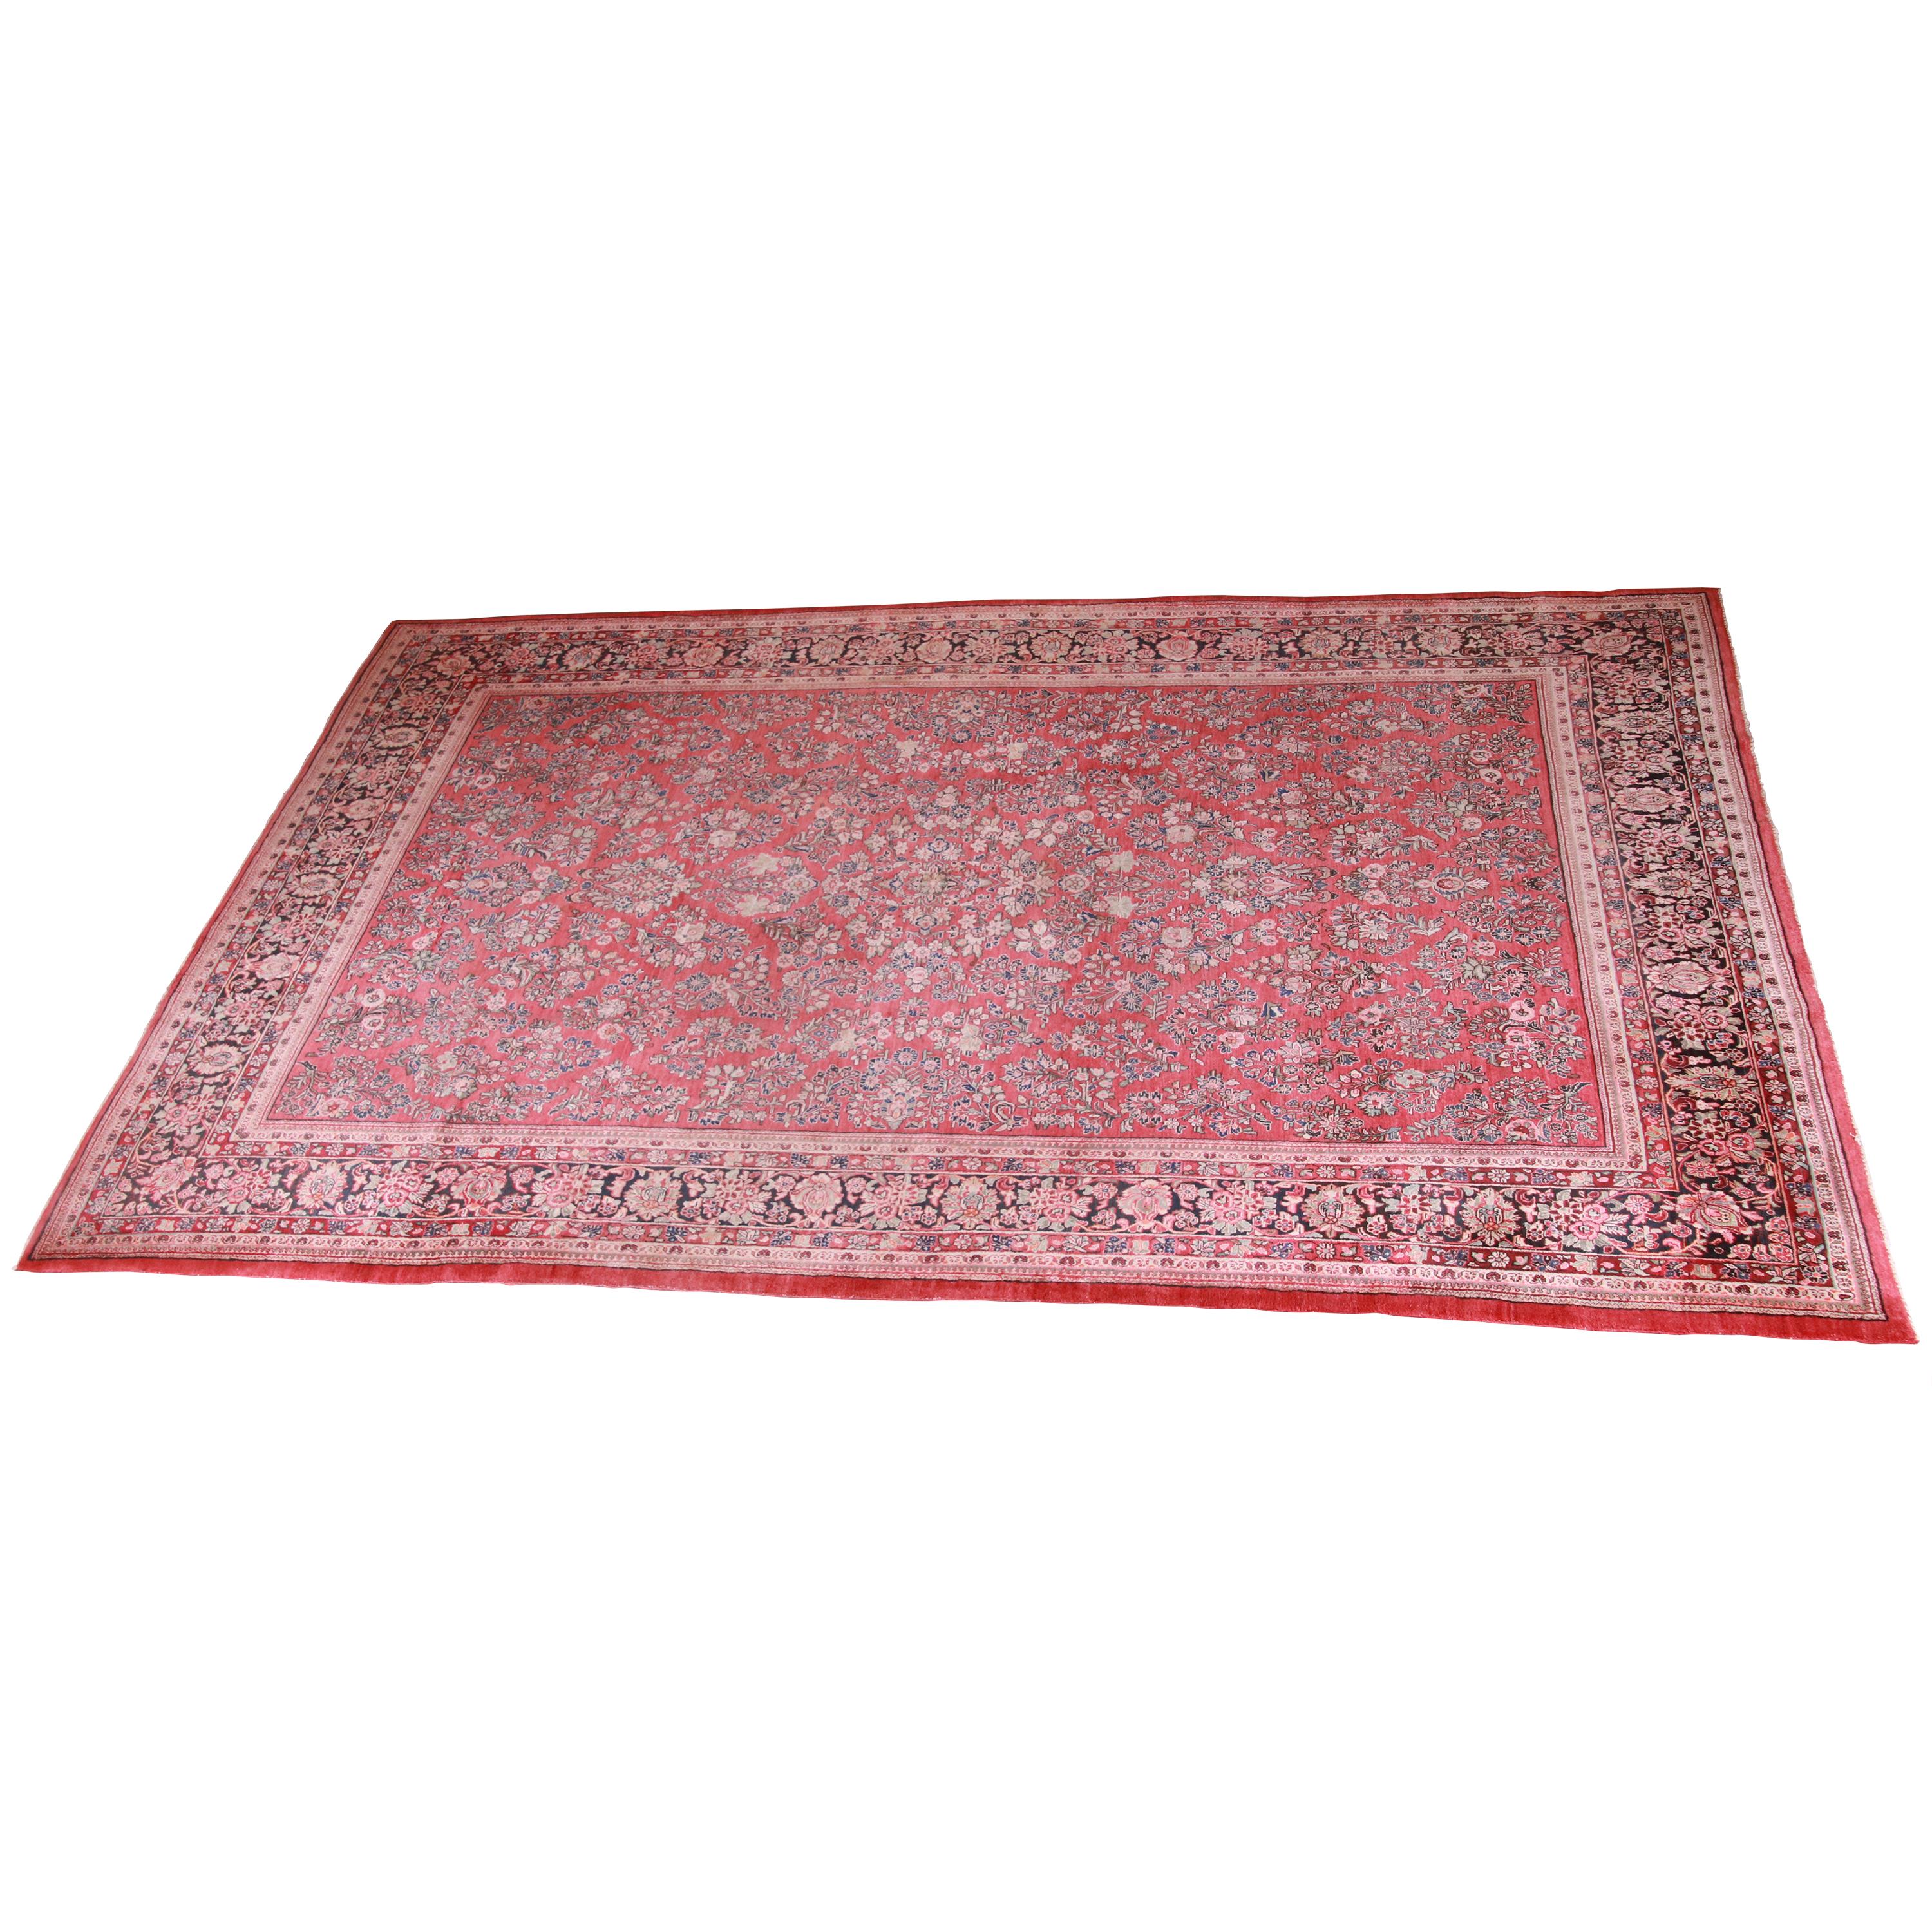 Semi-Antique Hand-Knotted Persian Sarouk Room Size Rug, circa 1940s For Sale